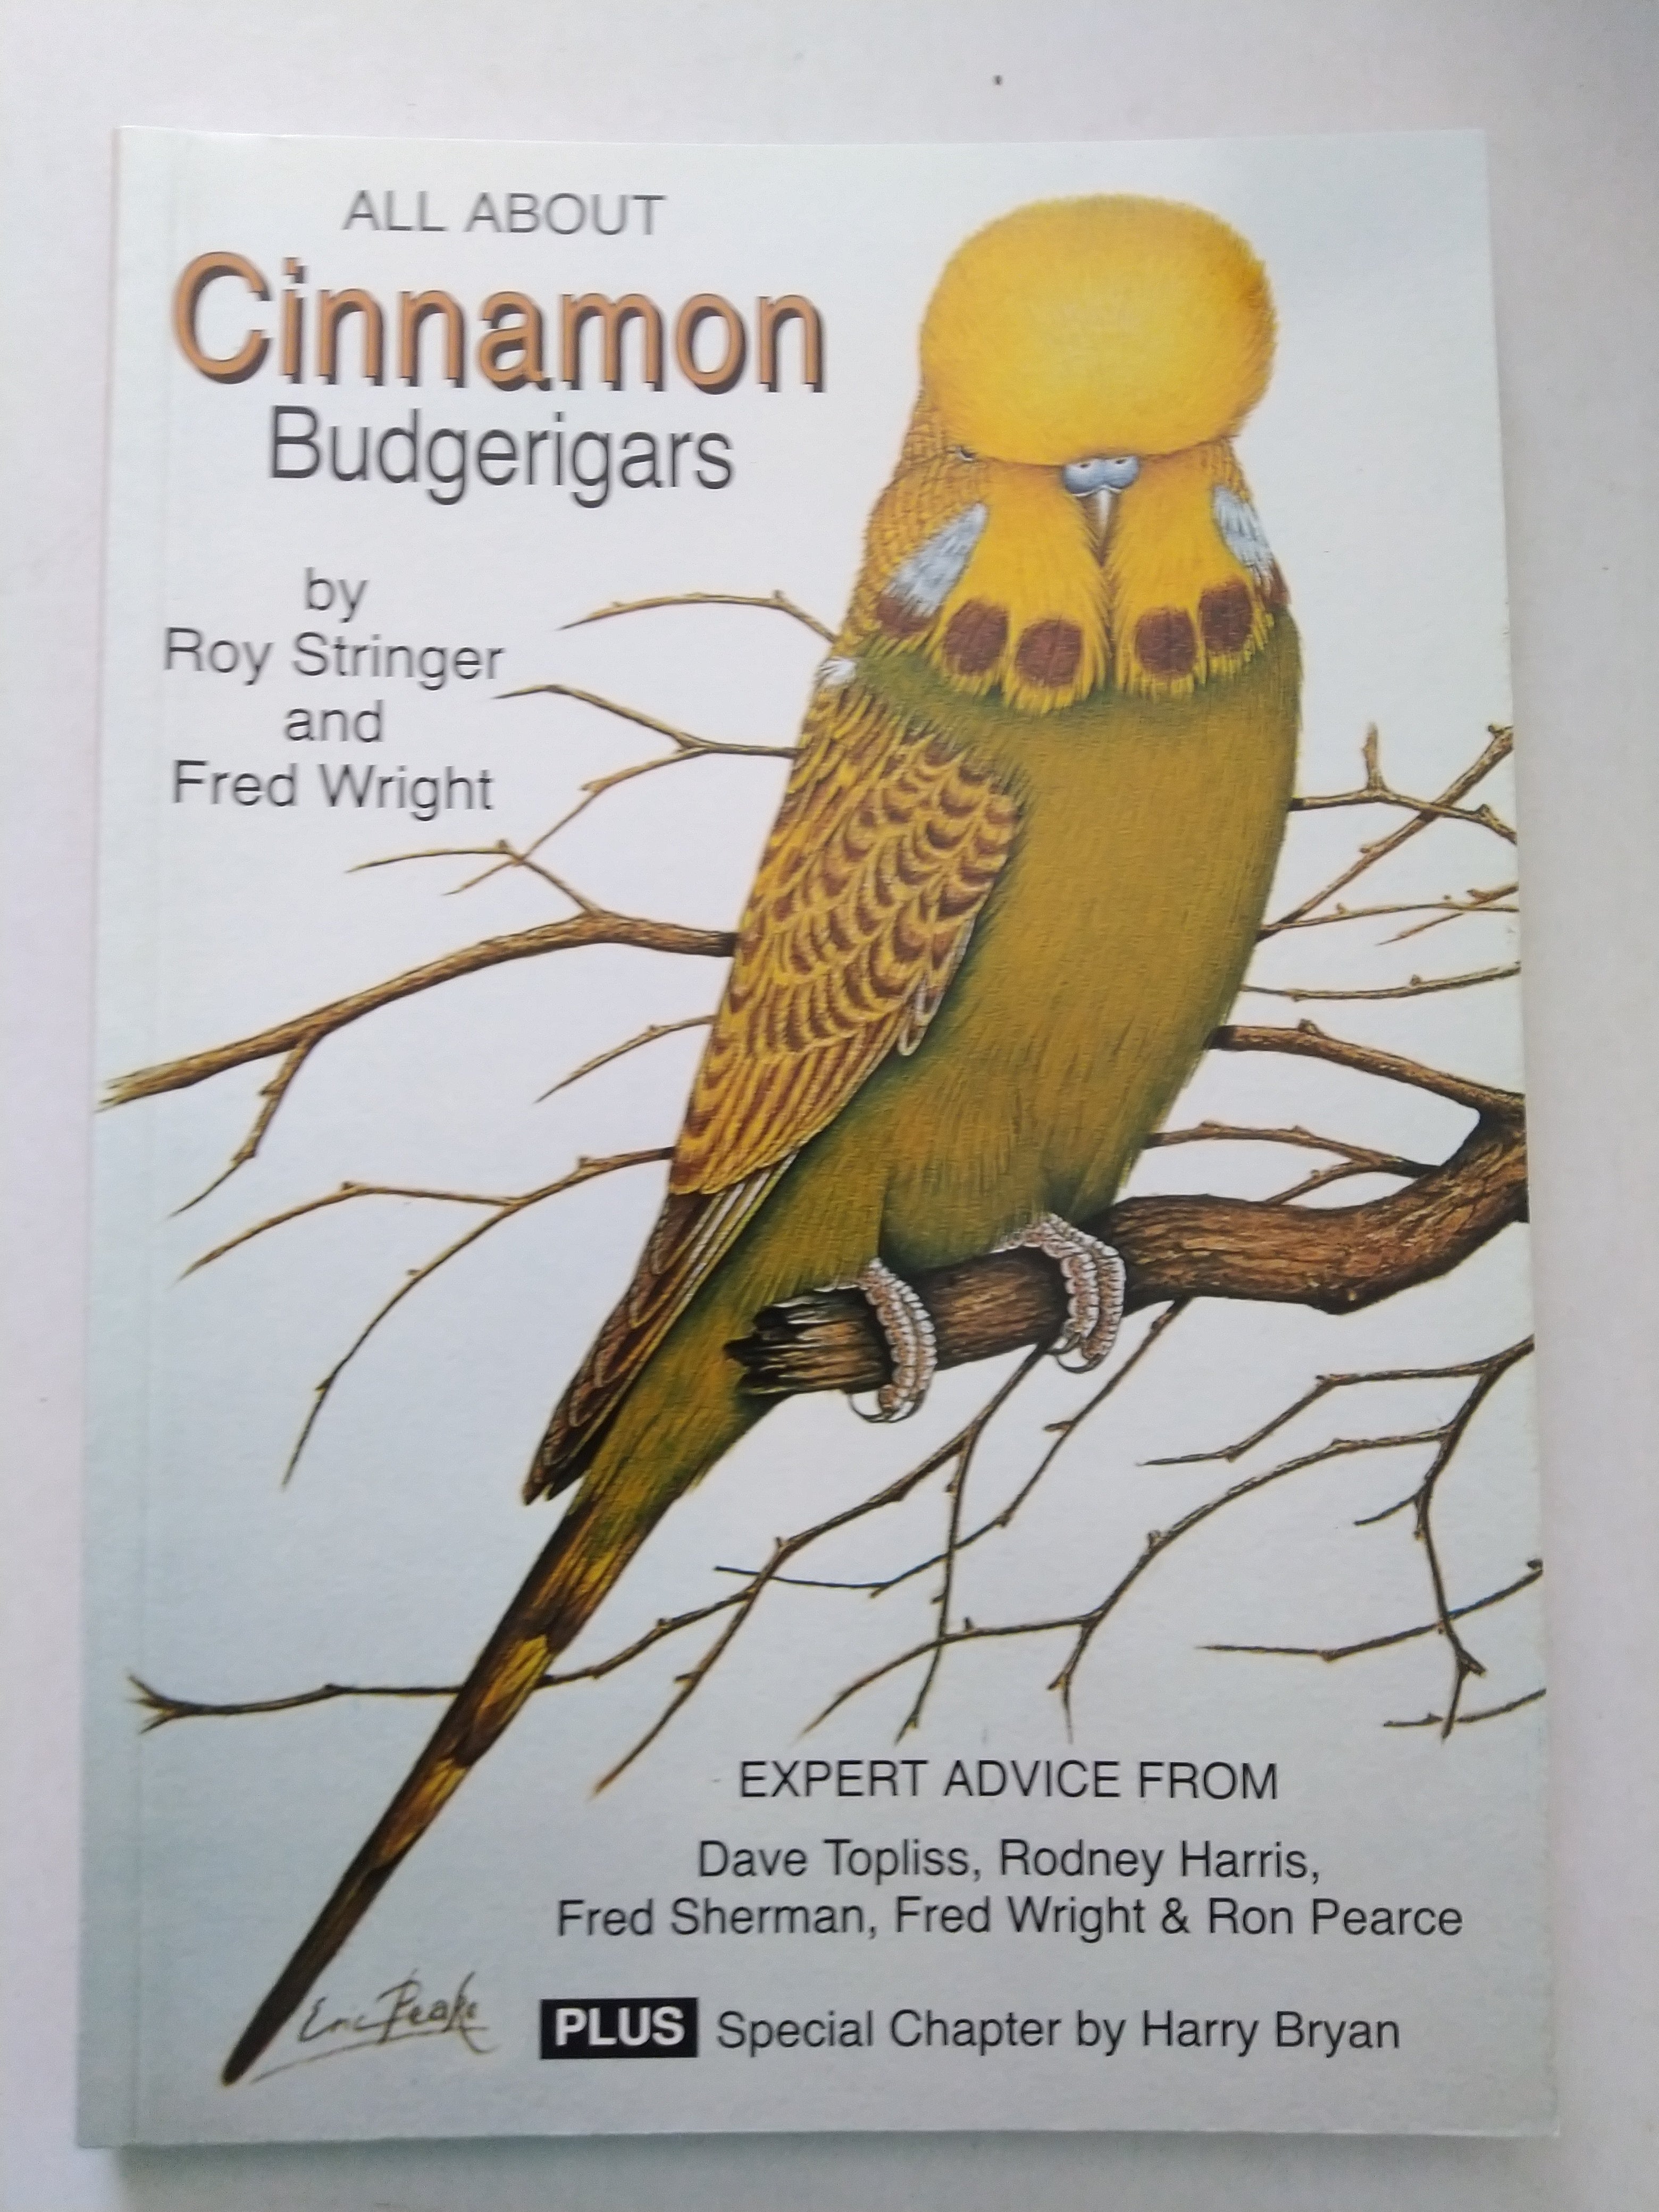 All About Cinnamon Budgerigars by Fred Wright and Roy Stringer (New)